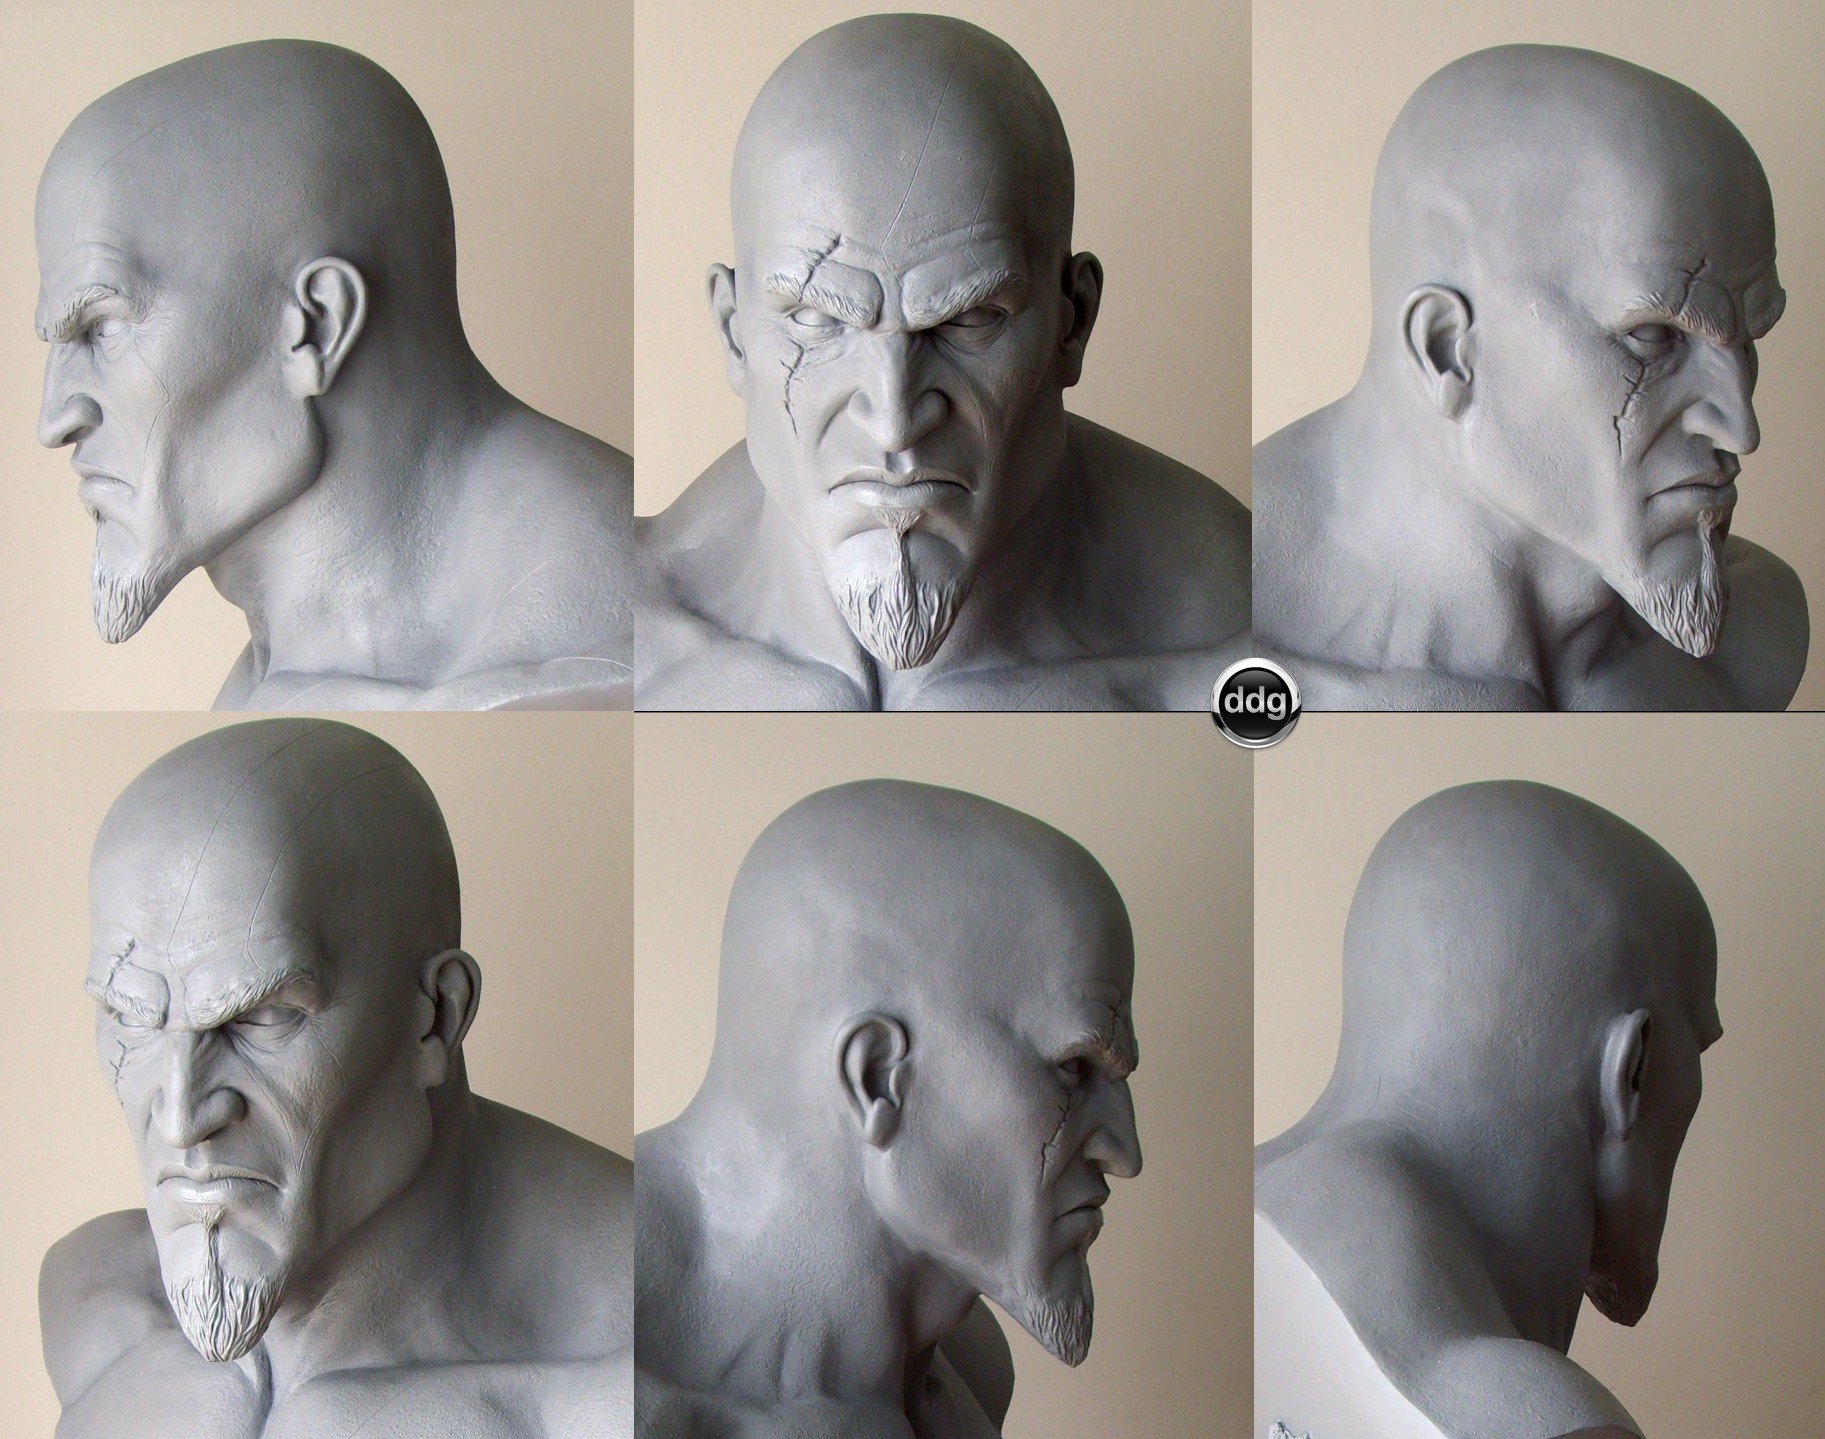 Busts and bas-reliefs of famous people - Kratos God of War